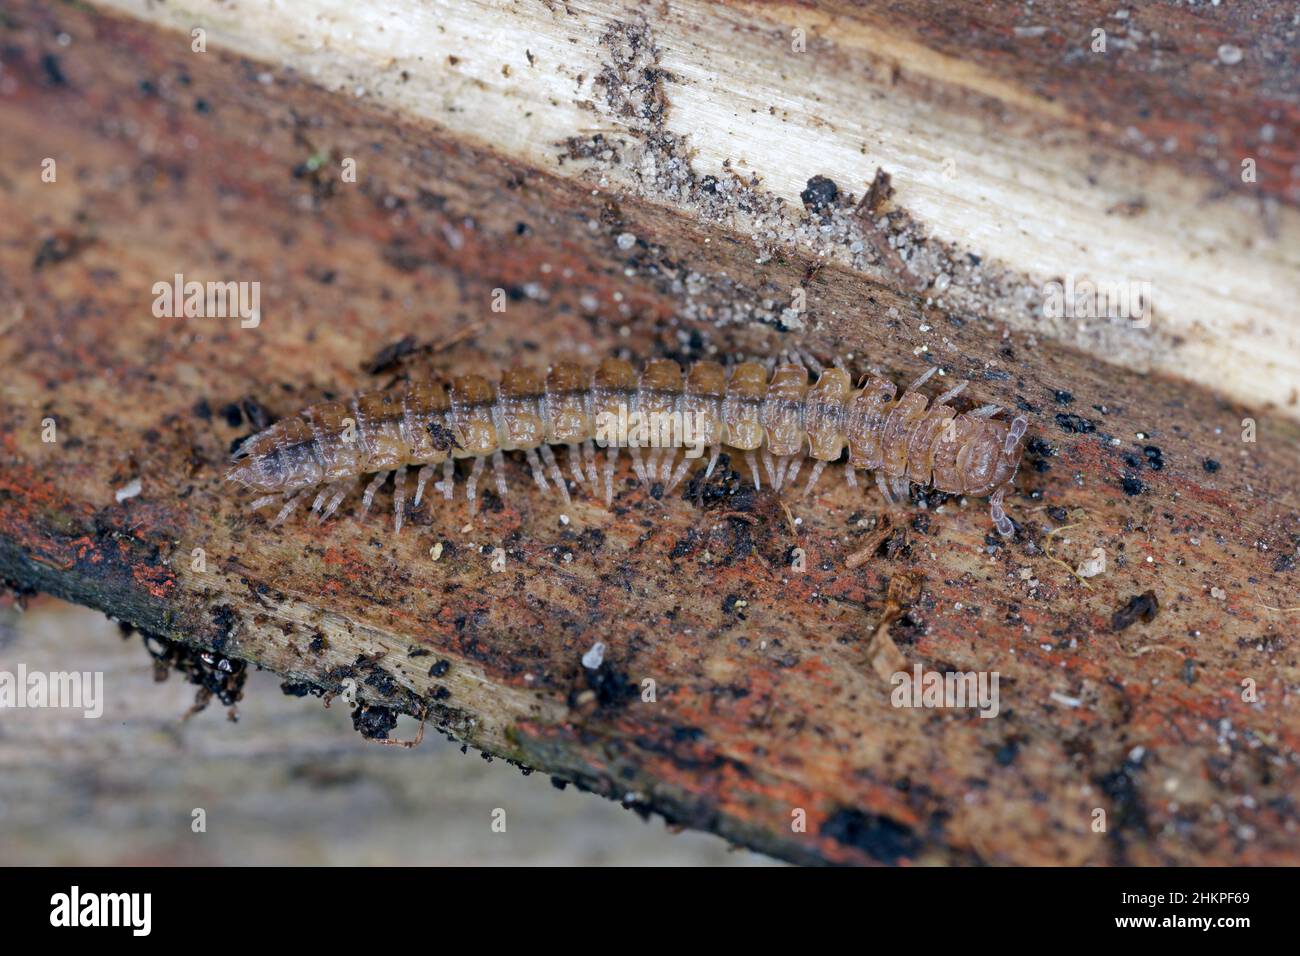 Flat-backed millipede (Polydesmus angustus) on wood of a dead tree Stock Photo